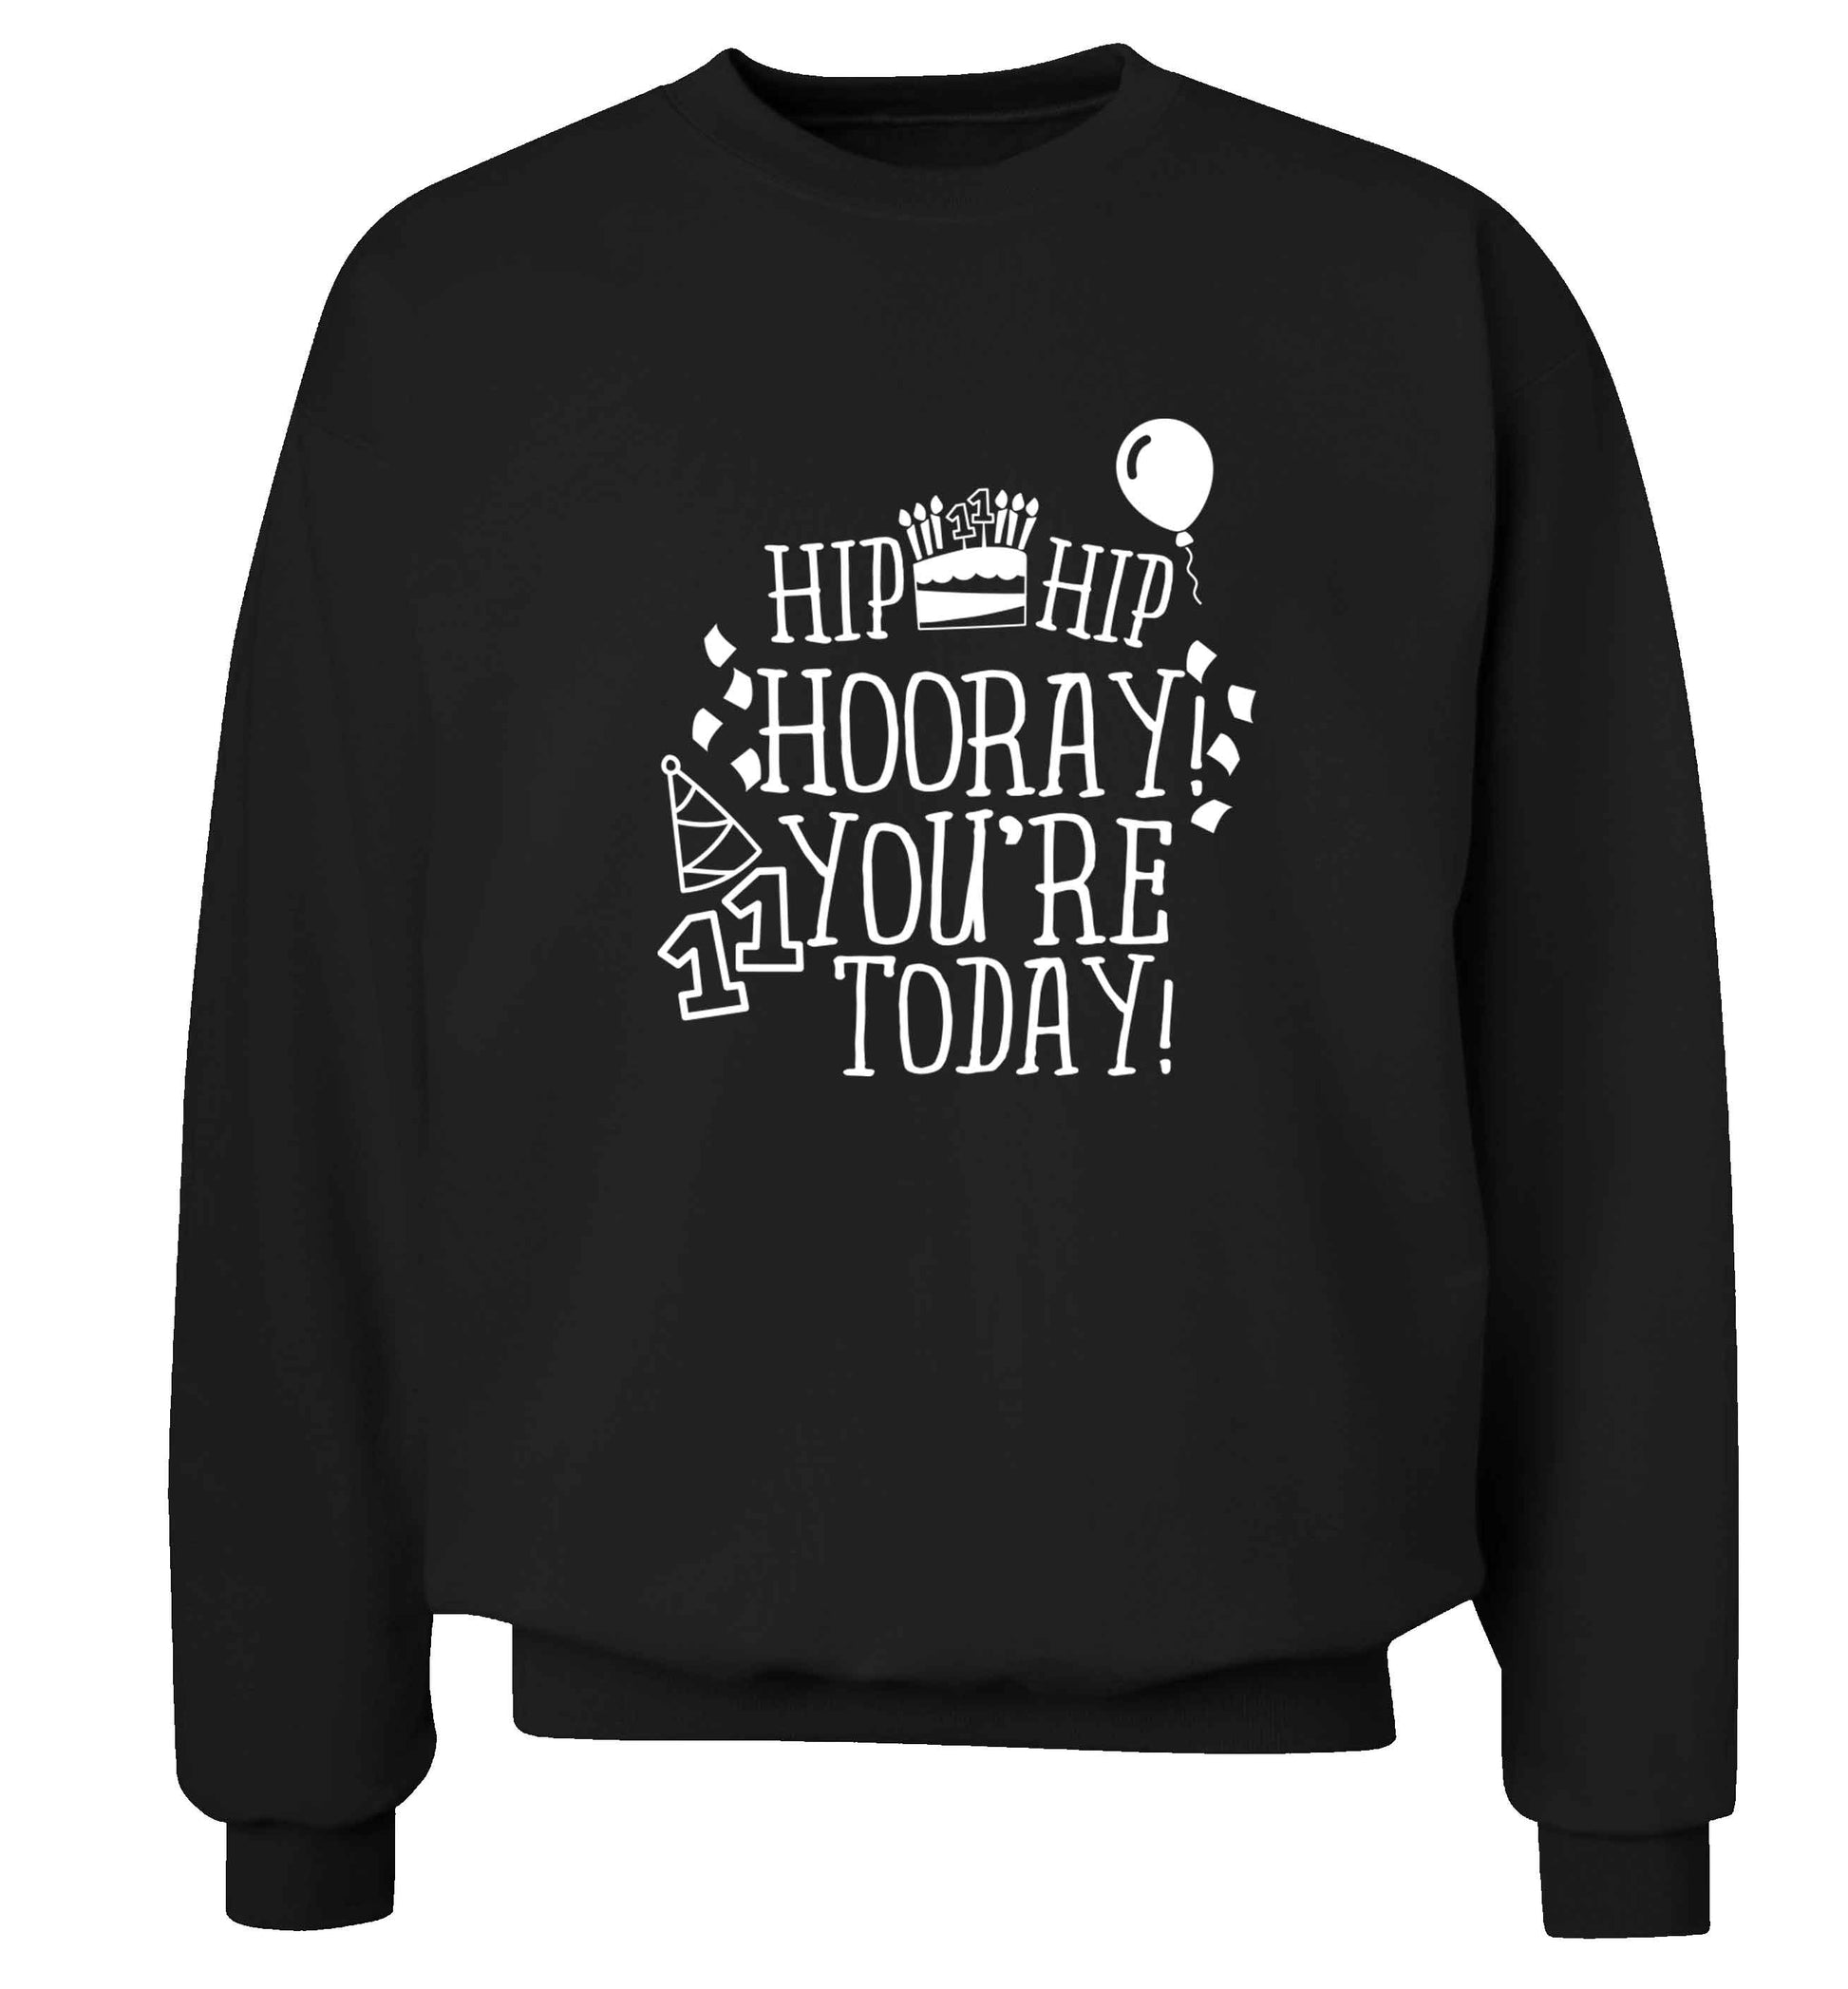 Hip hip hooray I you're eleven today! adult's unisex black sweater 2XL